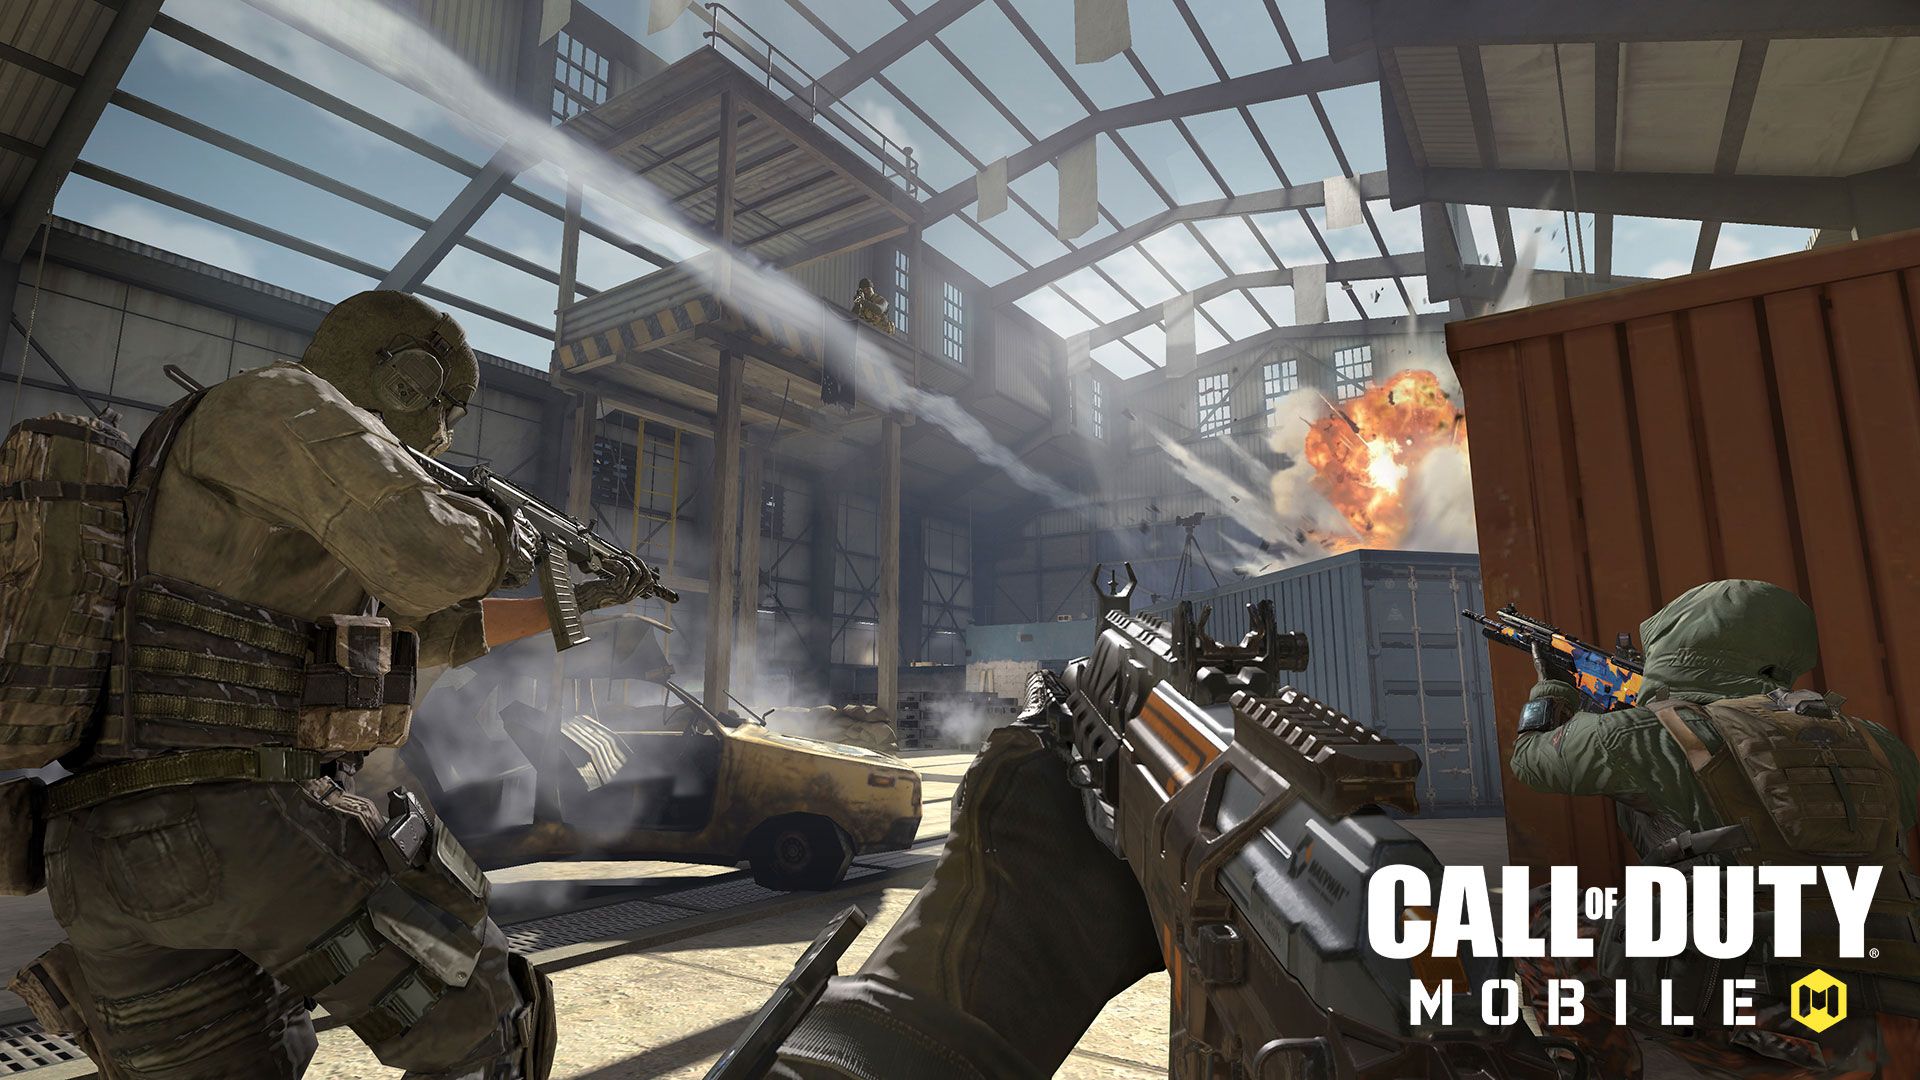 Call Of Duty Mobile Screens image 4